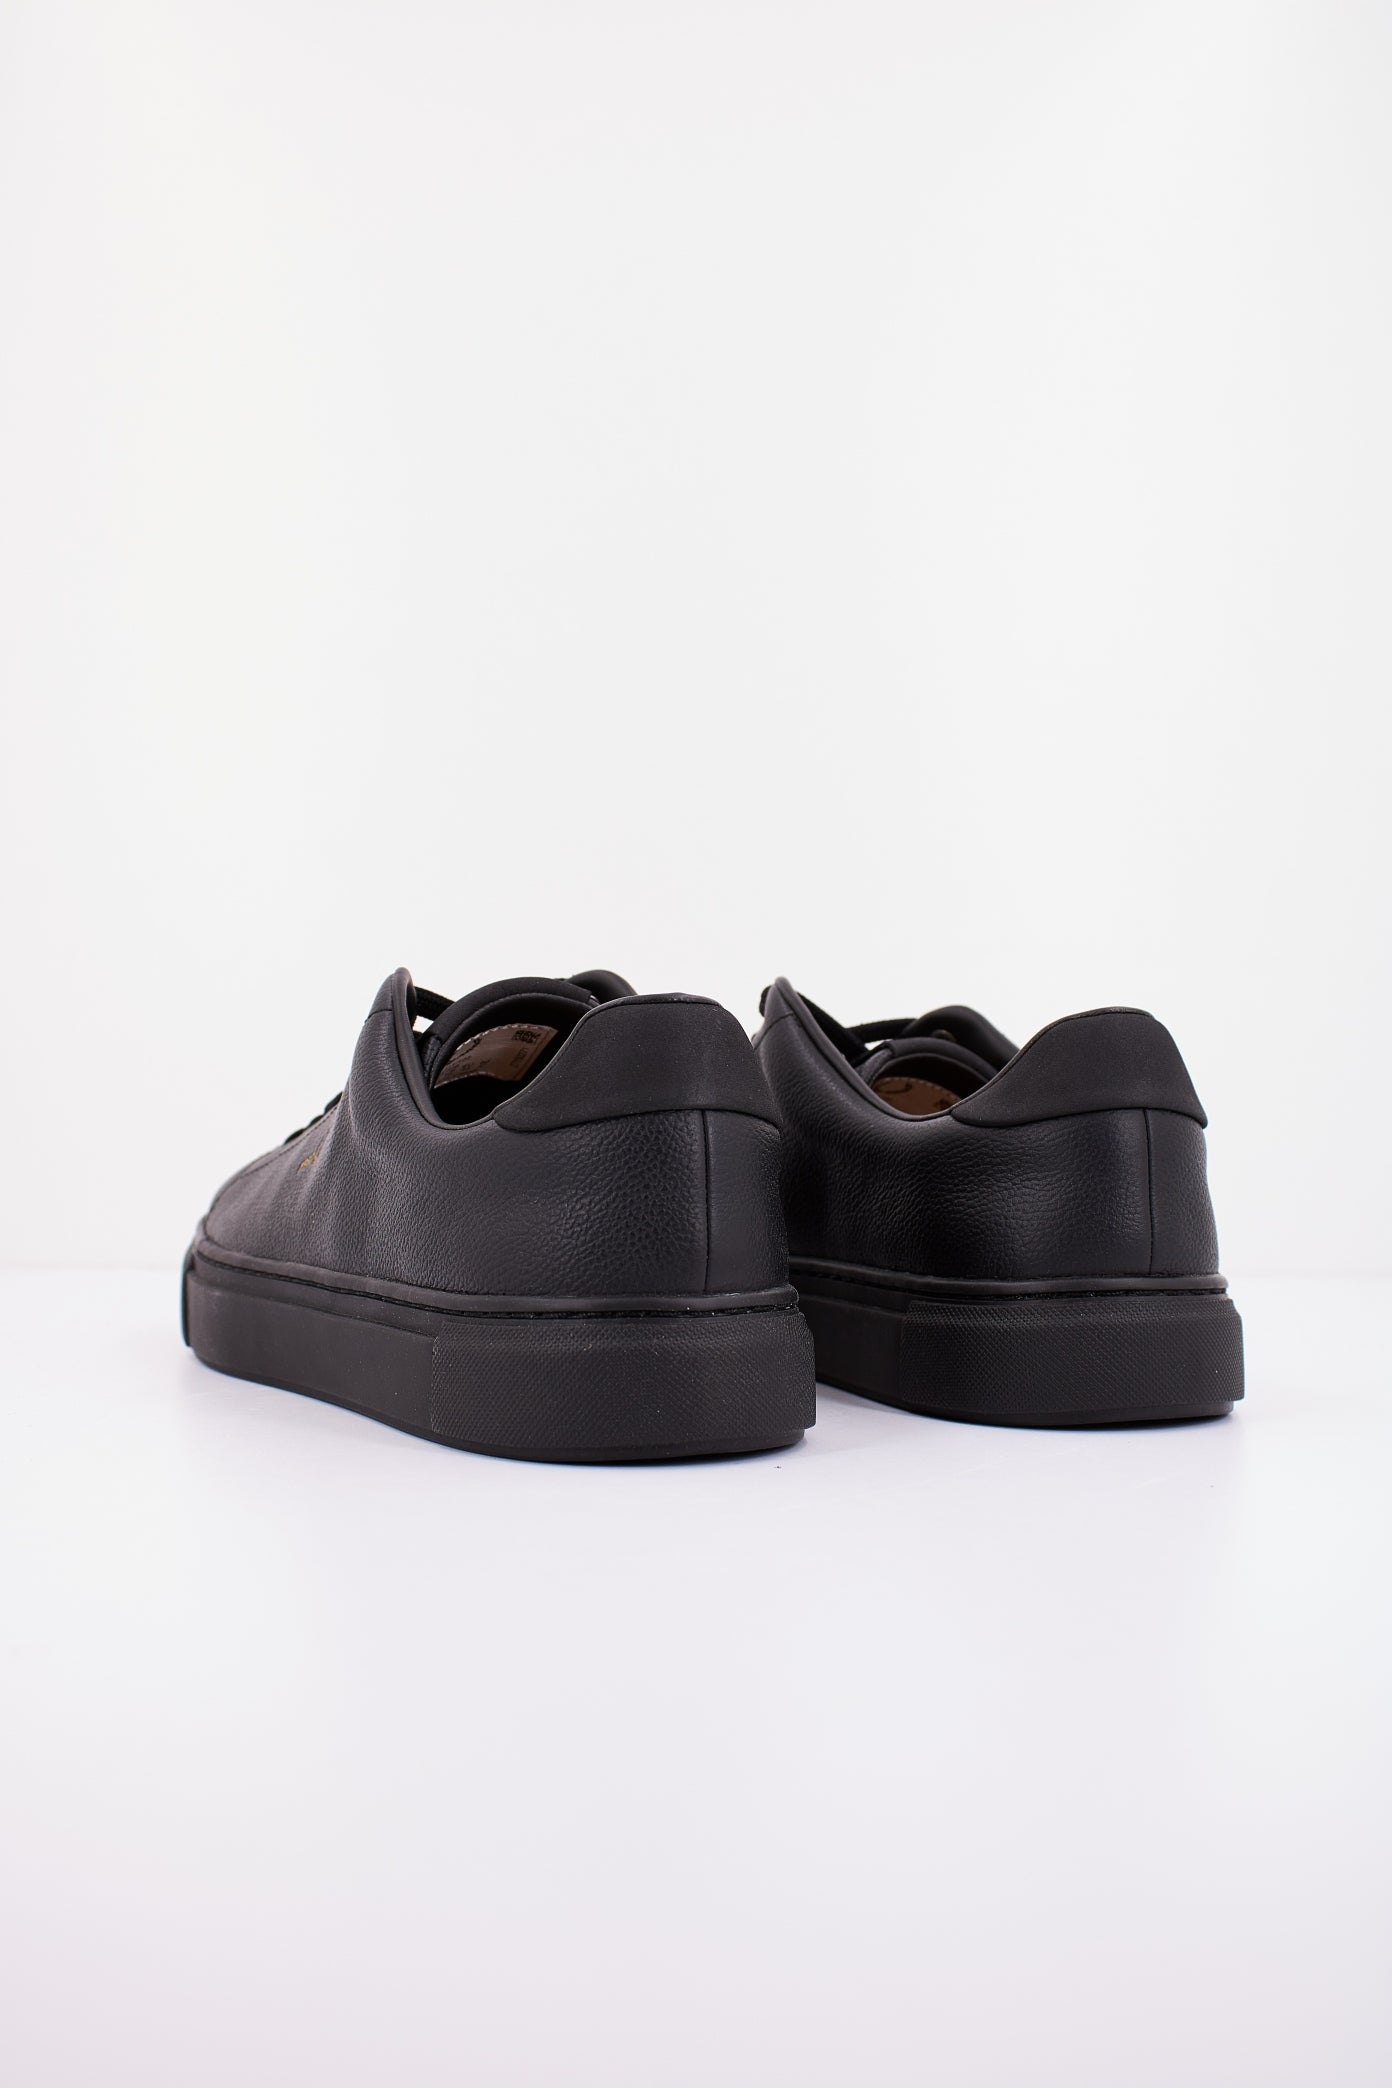 FRED PERRY B TUMBLED LEATHER en color NEGRO  (3)